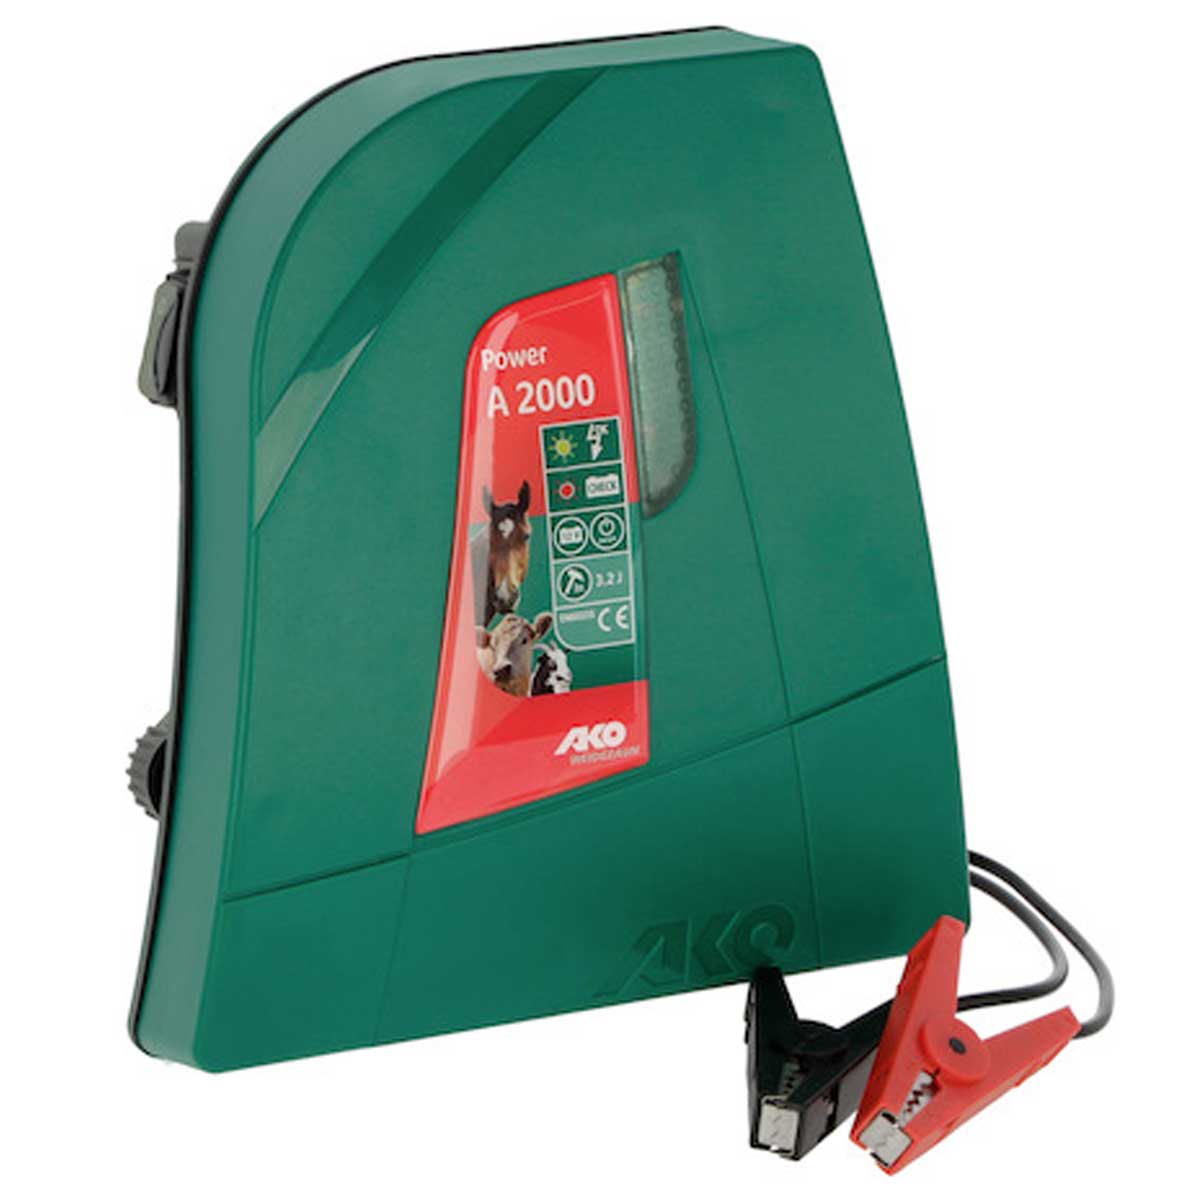 AKO Power A 2000 electric fence energiser 12V, 3,2 joules